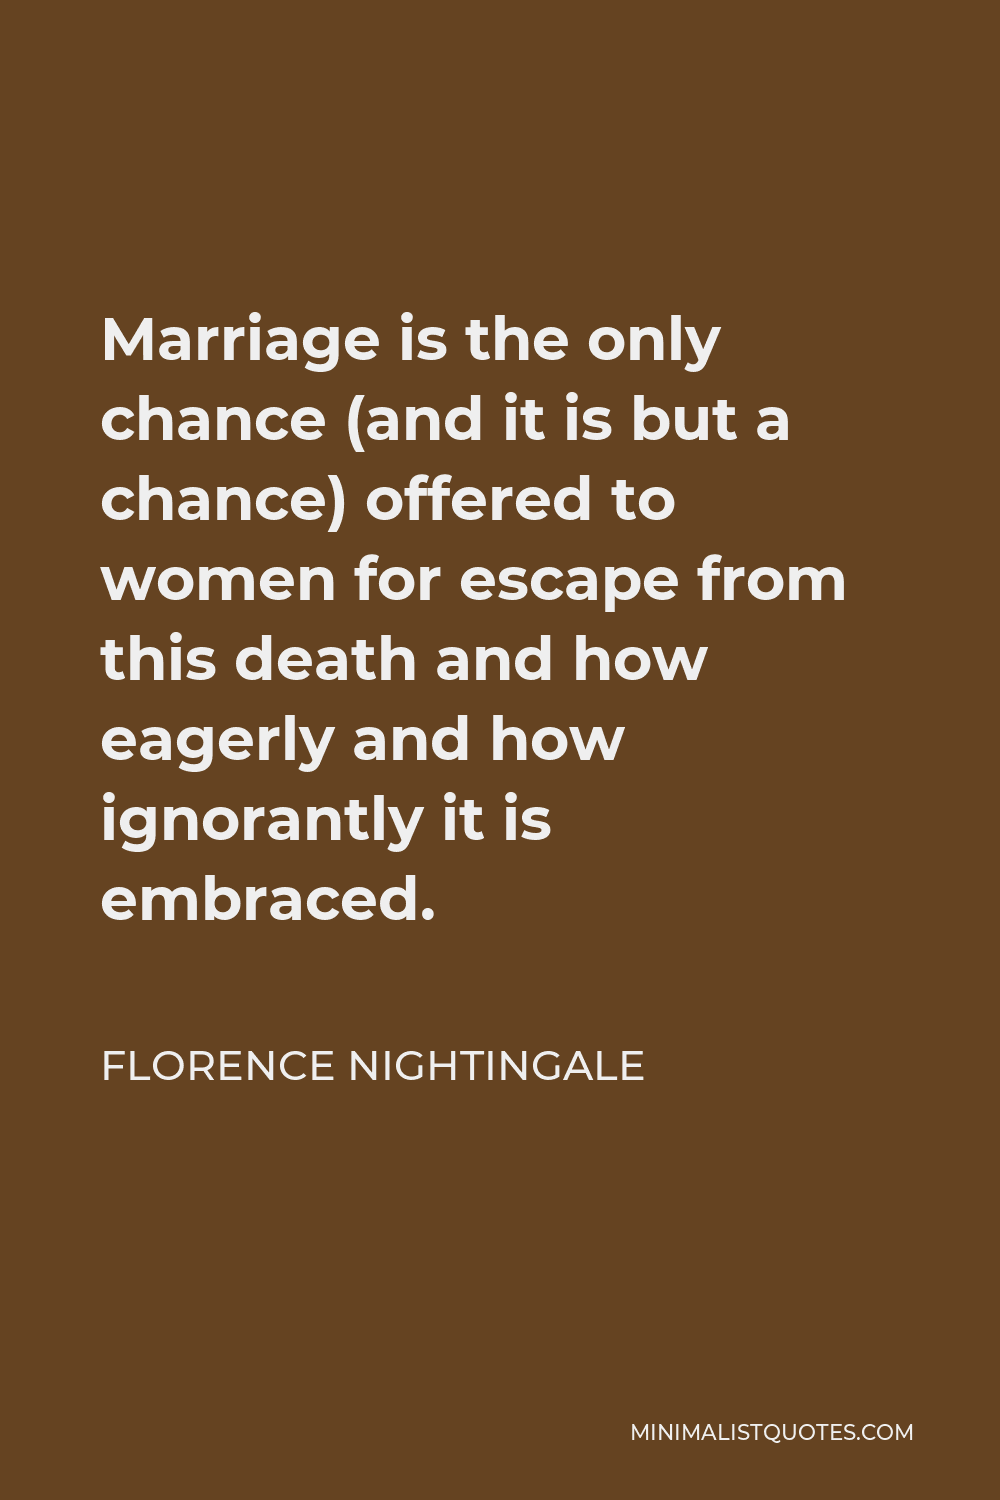 Florence Nightingale Quote - Marriage is the only chance (and it is but a chance) offered to women for escape from this death and how eagerly and how ignorantly it is embraced.